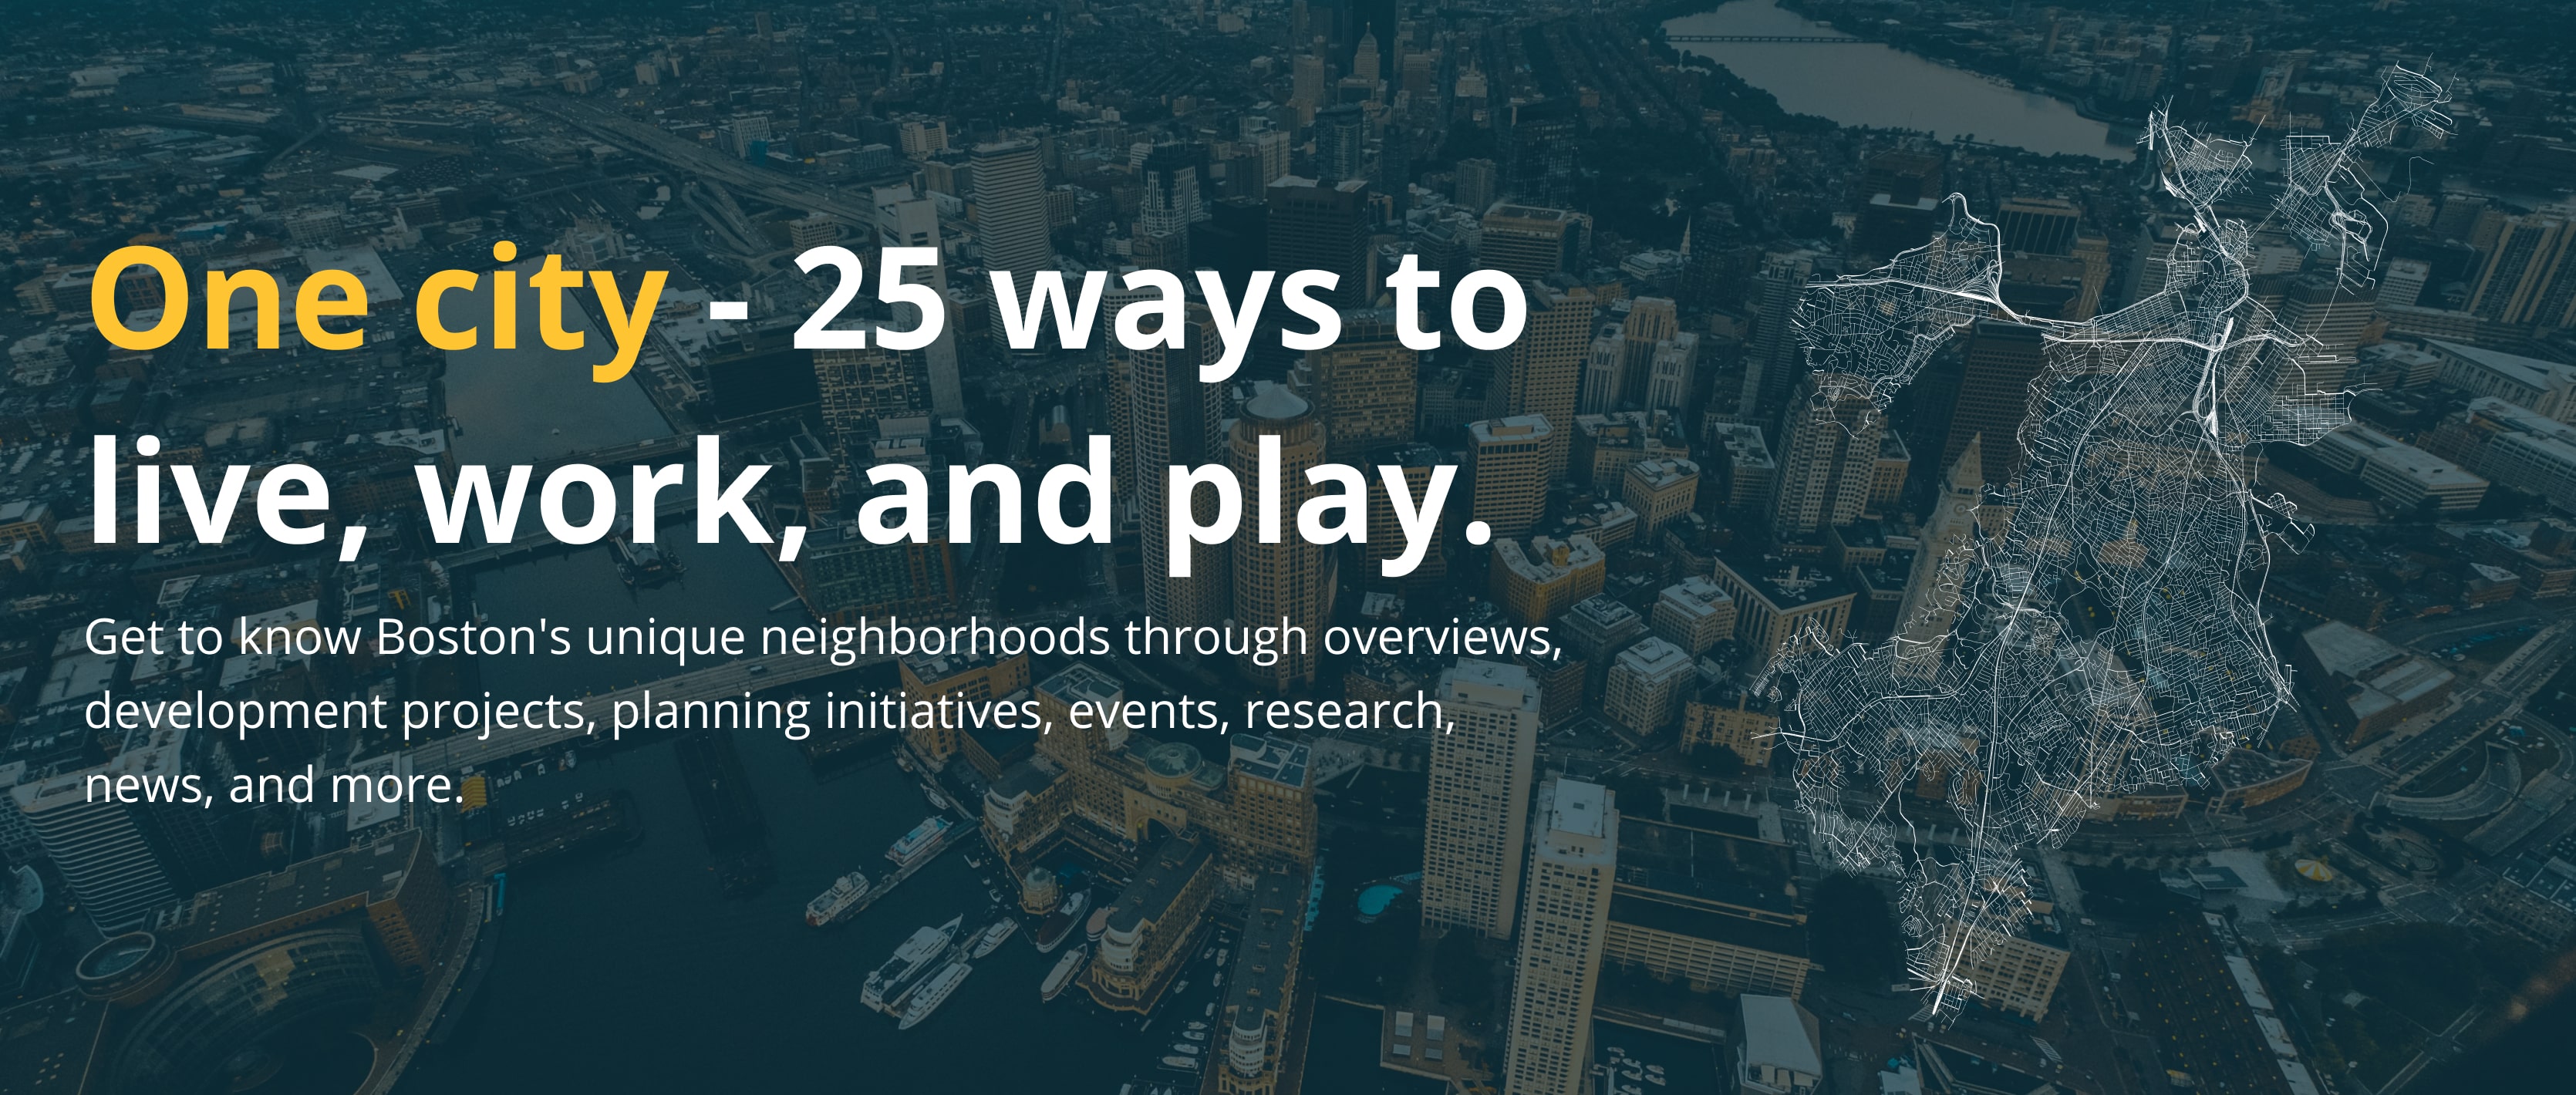 <h2>
	One city - 26 ways to live, work, and play.</h2>
Get to know Boston's unique neighborhoods through overviews, development projects, planning initiatives, events, research, news, and more.